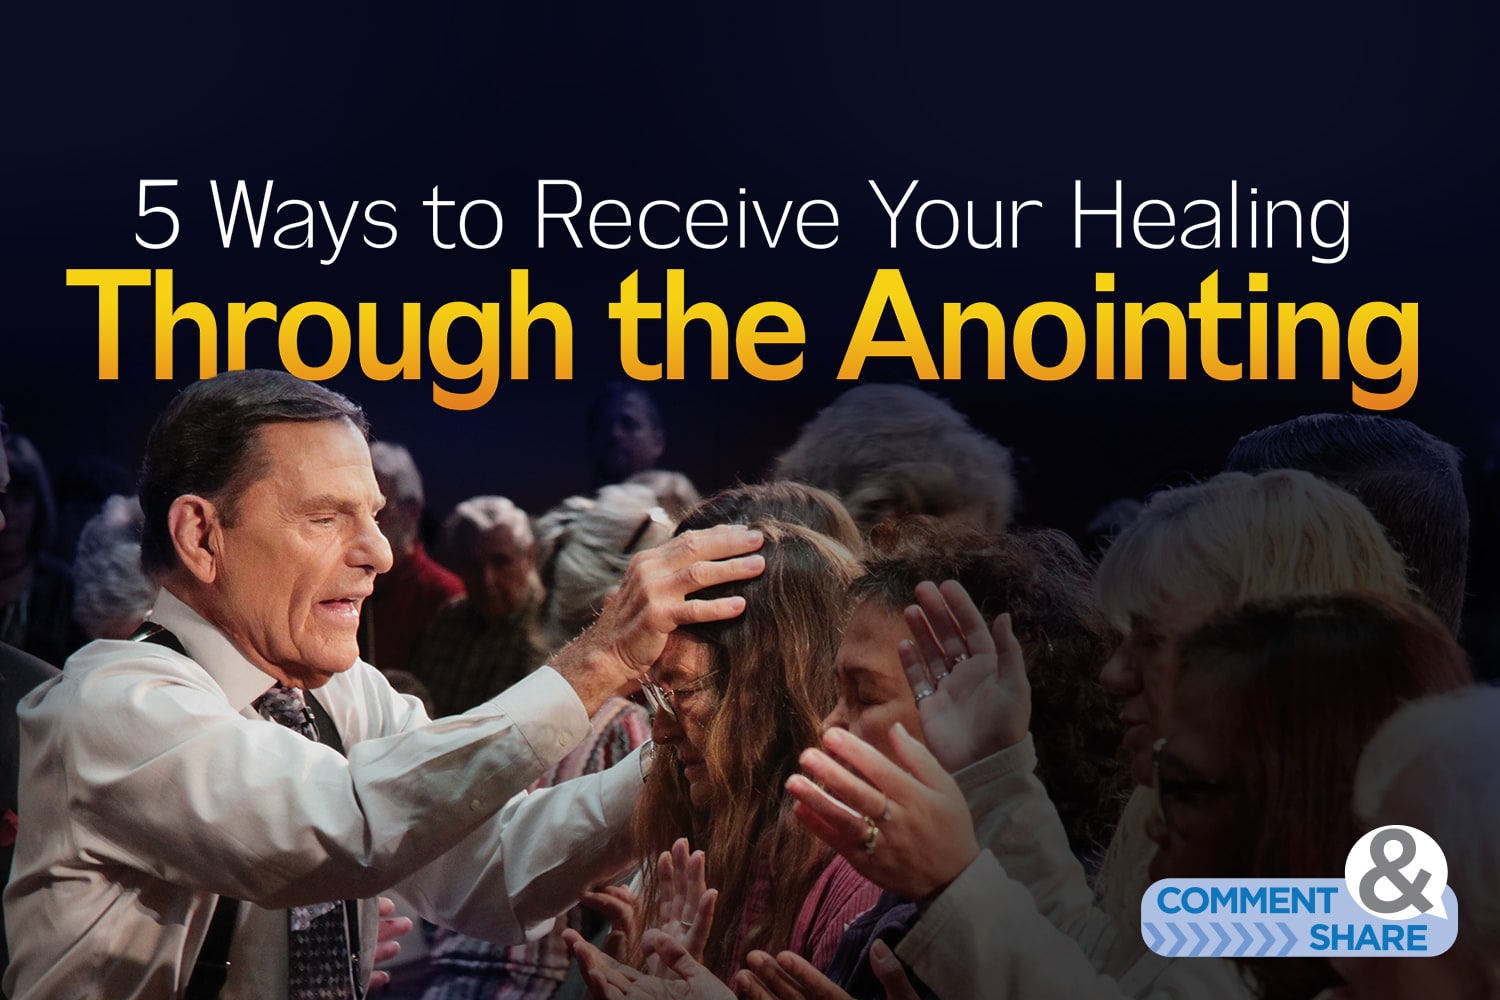 5 Ways to Receive Your Healing Through the Anointing